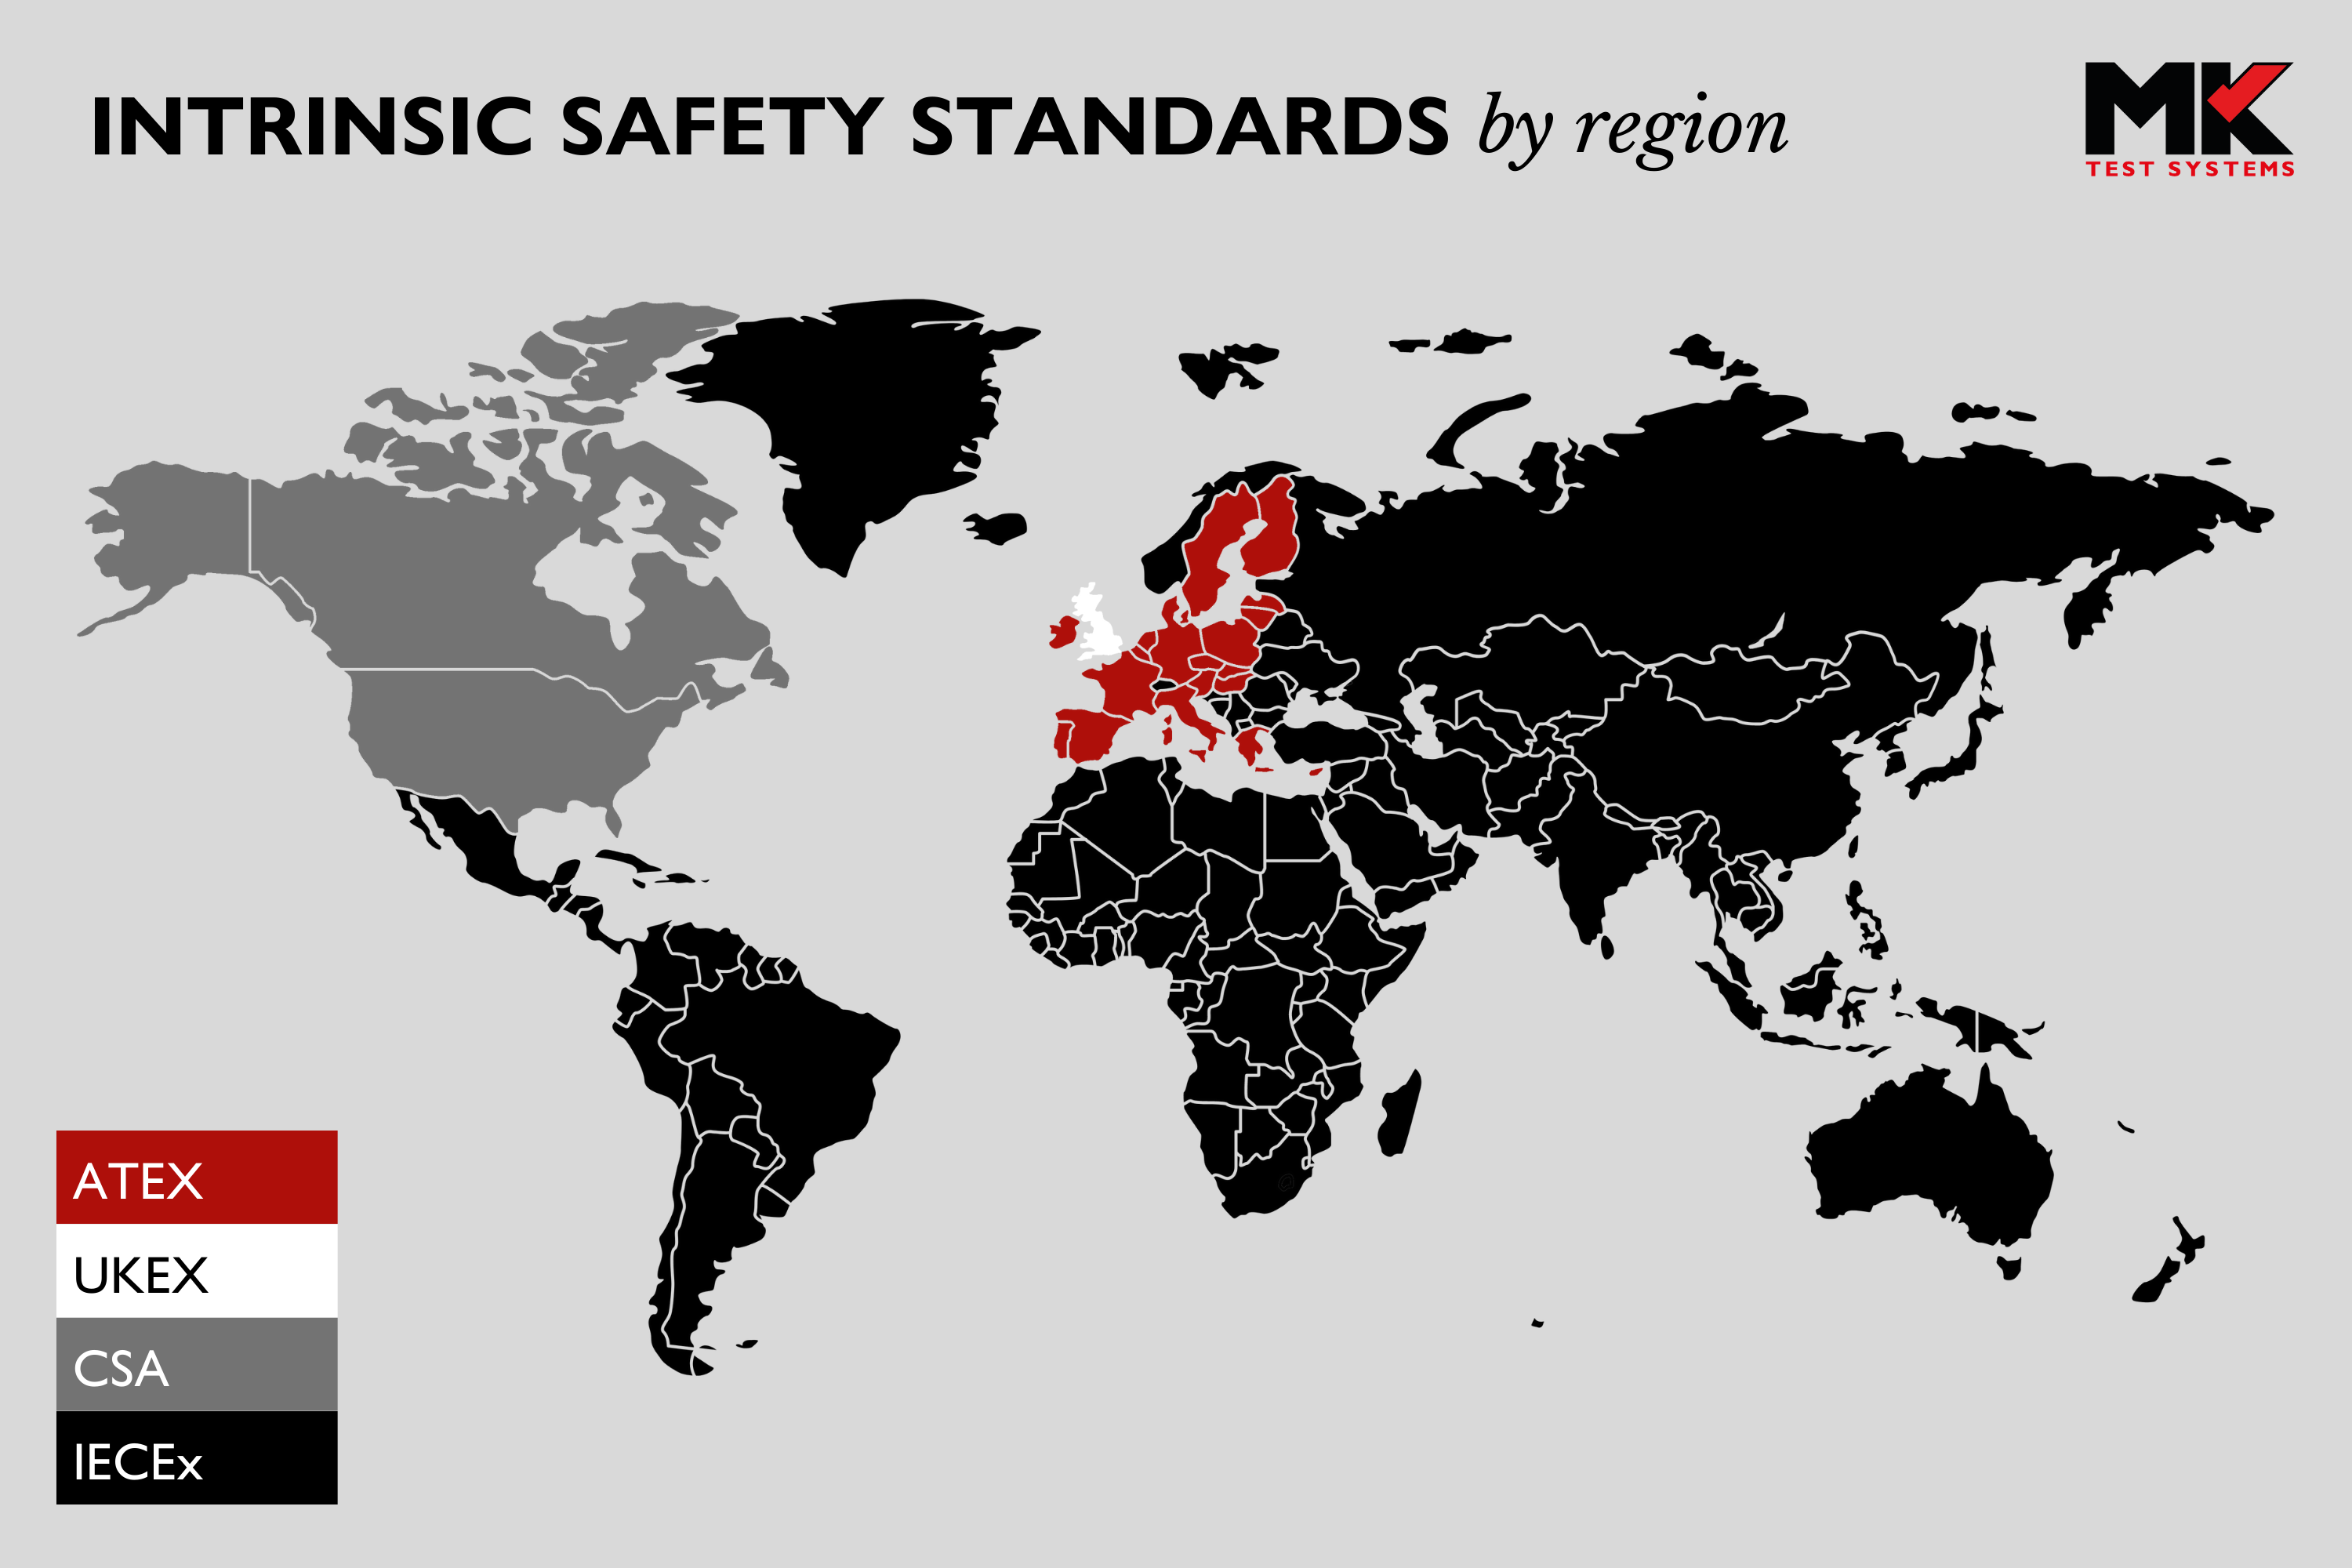 map showing intrinsic safety standards by region